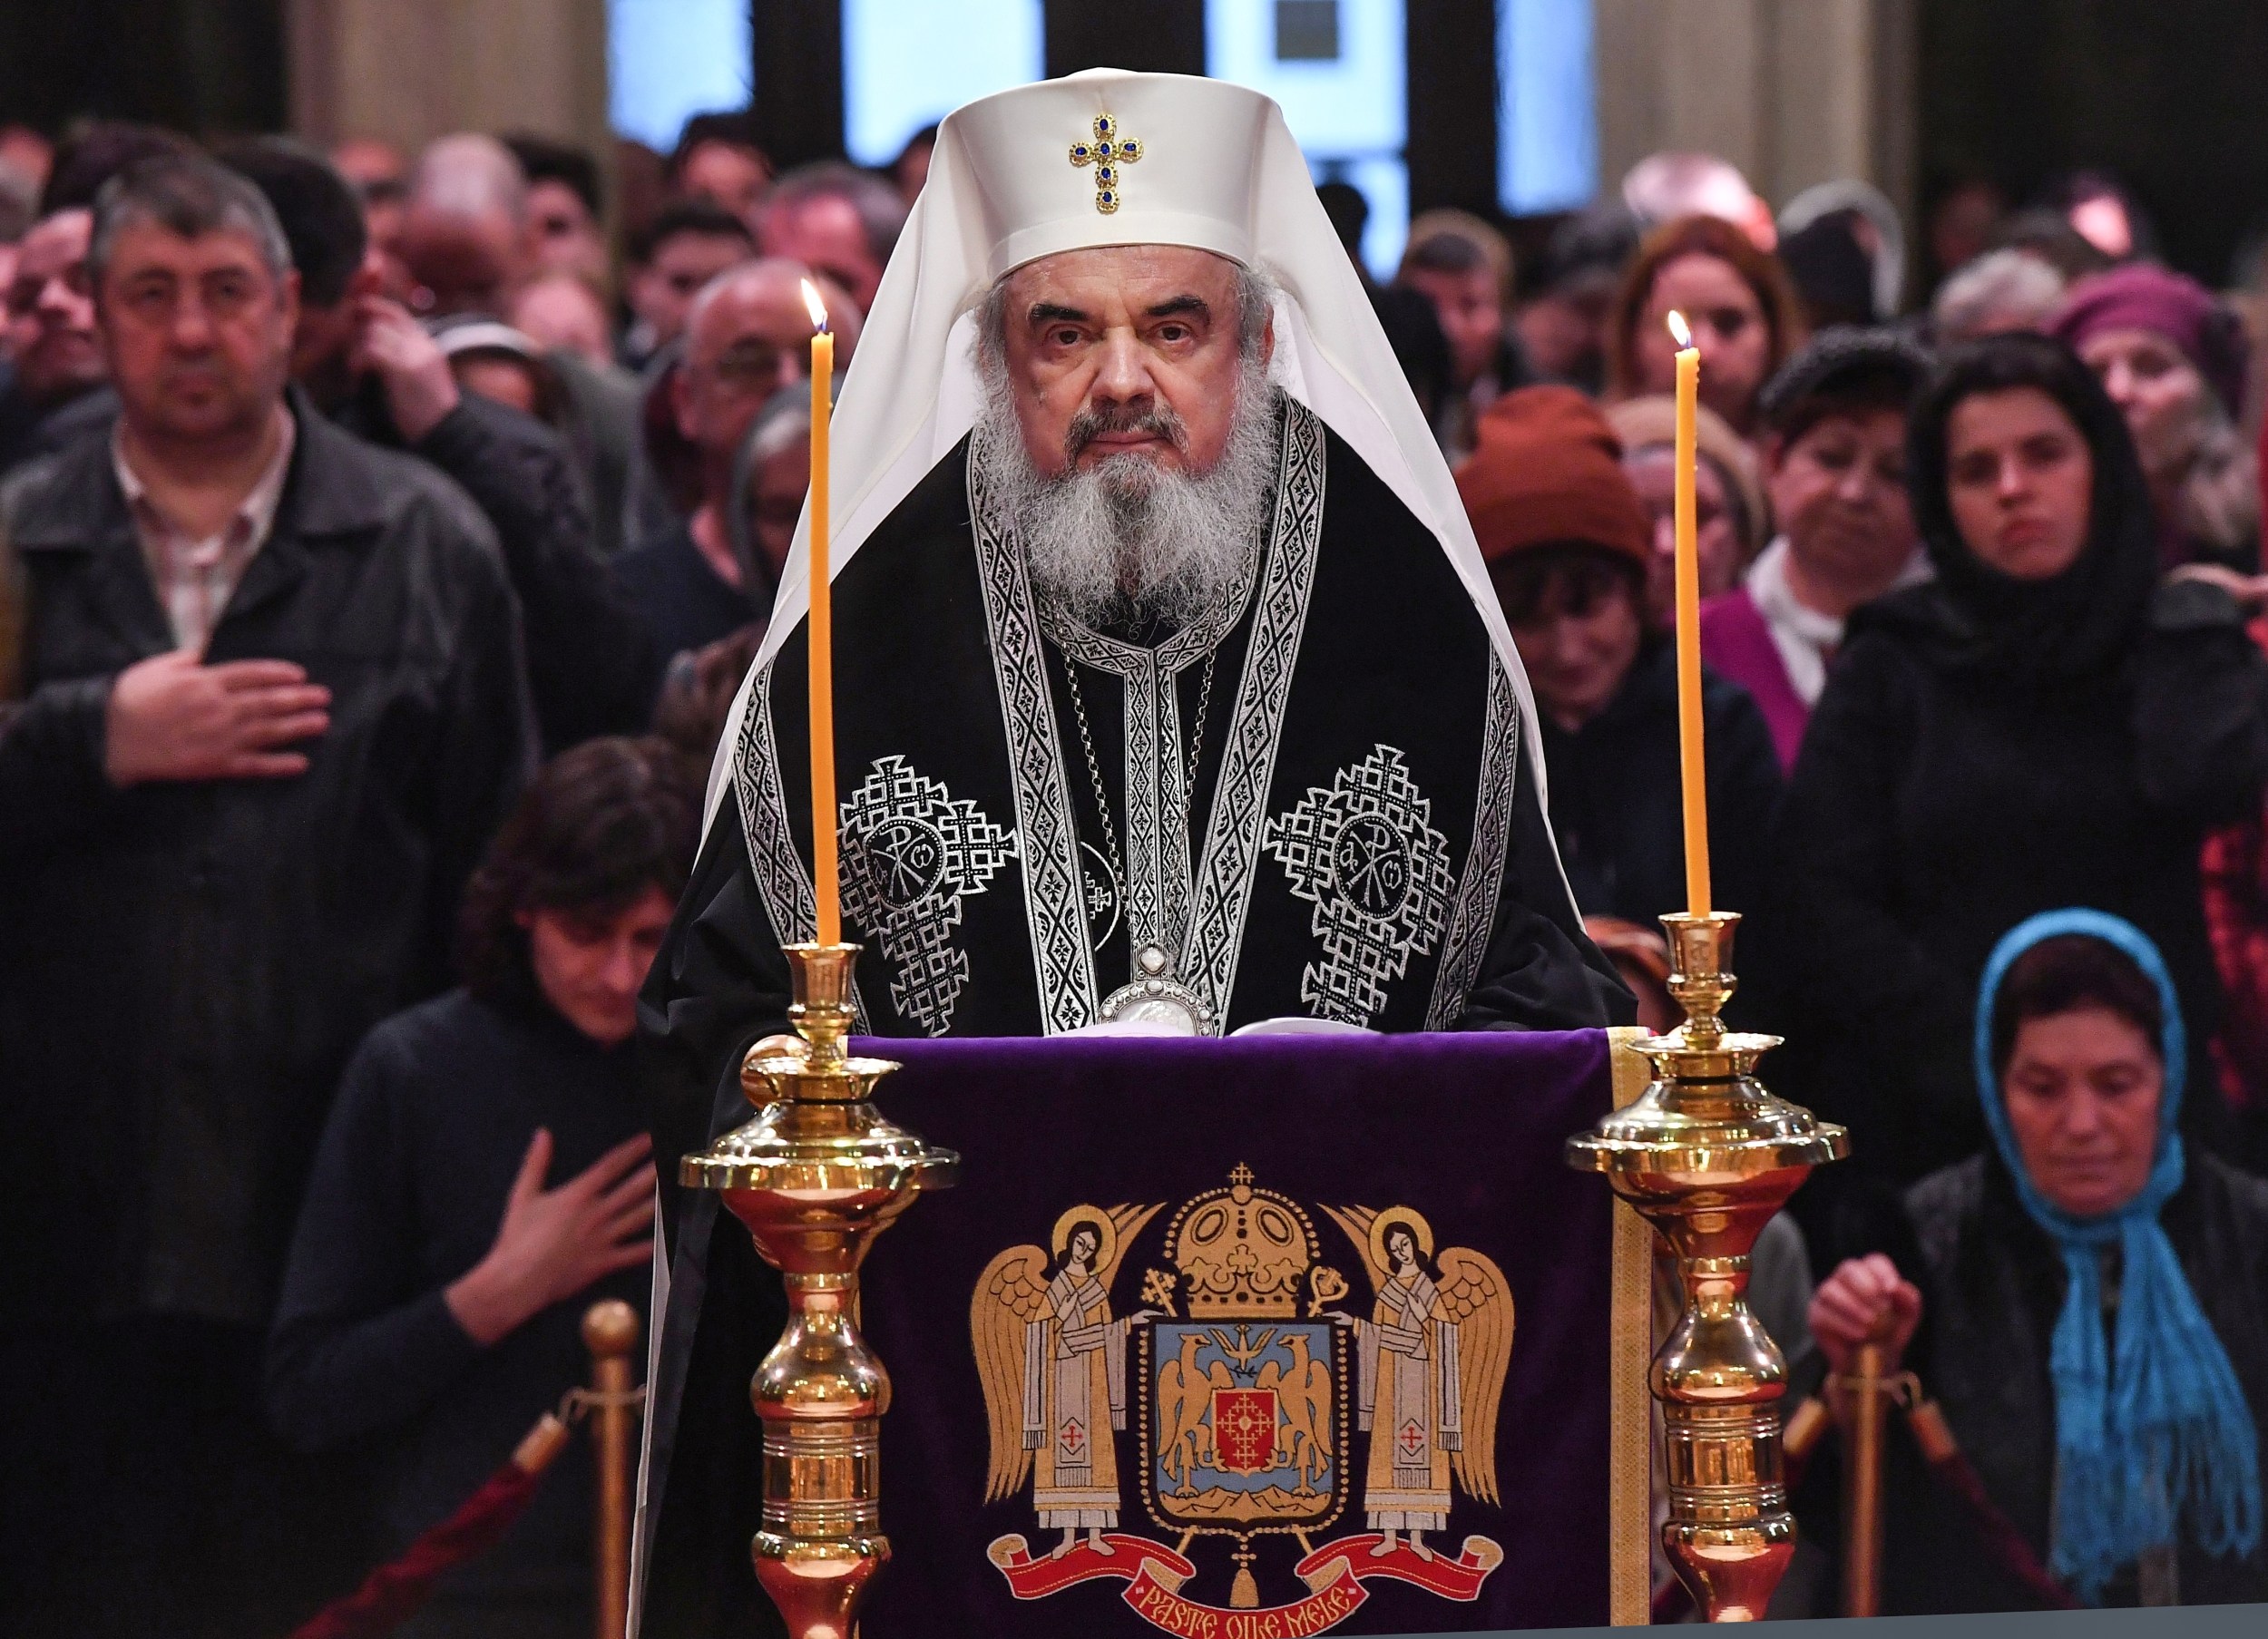 The purpose of fasting is to meet Christ : Patriarch Daniel says on Beginning of Great Lent